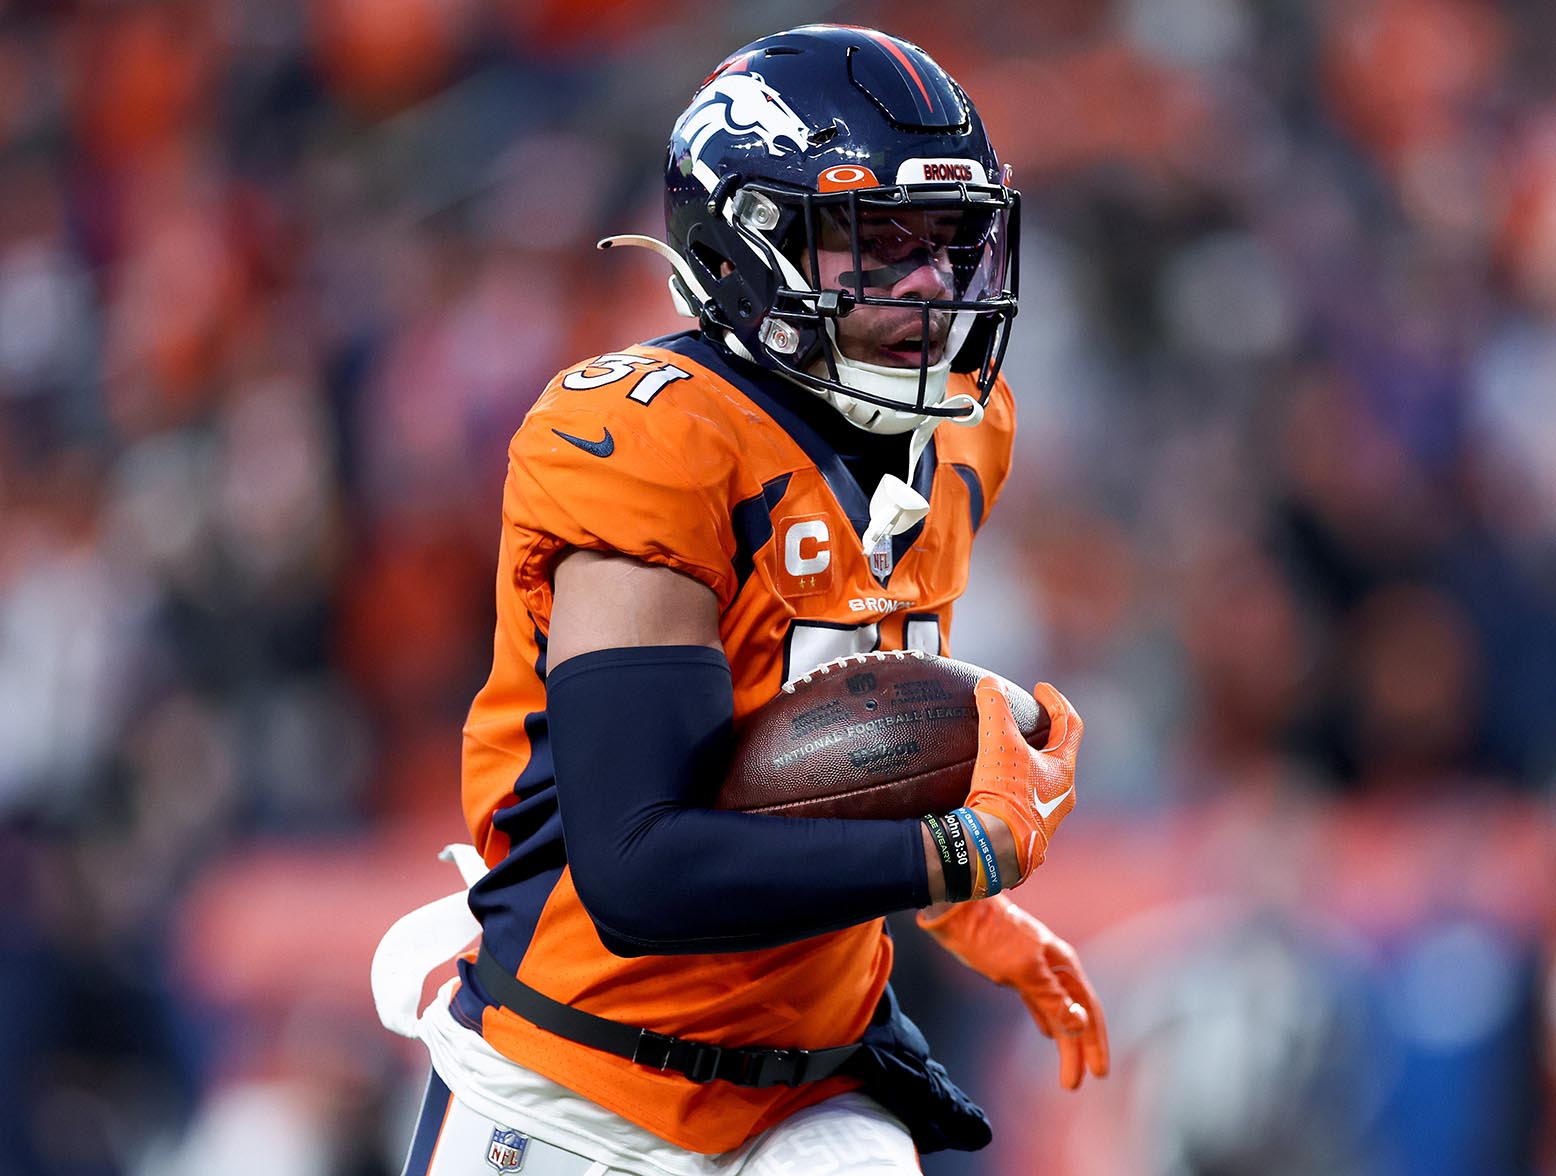 DENVER, COLORADO - DECEMBER 18: Justin Simmons #31 of the Denver Broncos carries the ball after an interception against the Arizona Cardinals during the third quarter of the game at Empower Field At Mile High on December 18, 2022 in Denver, Colorado. (Photo by Matthew Stockman/Getty Images)